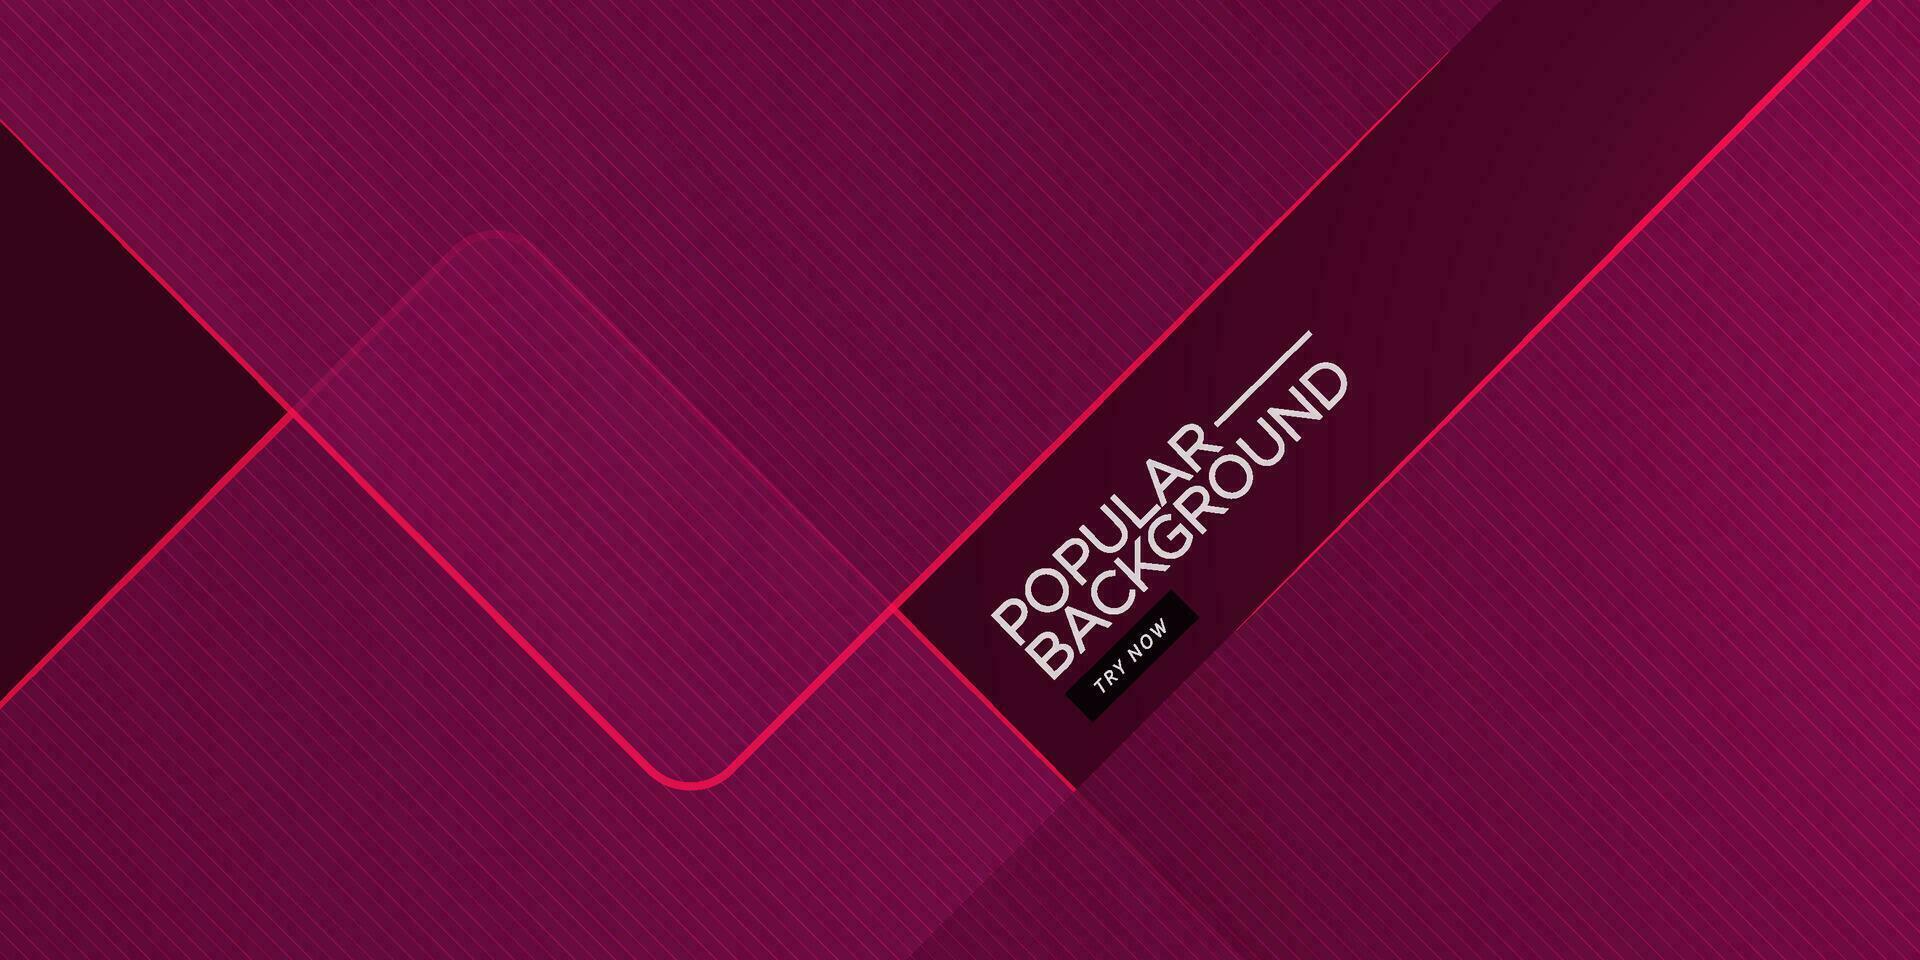 Modern abstract dark purple square overlap background. 3d look with shadow, stripe line pattern shapes composition with space for text. Eps10 vector